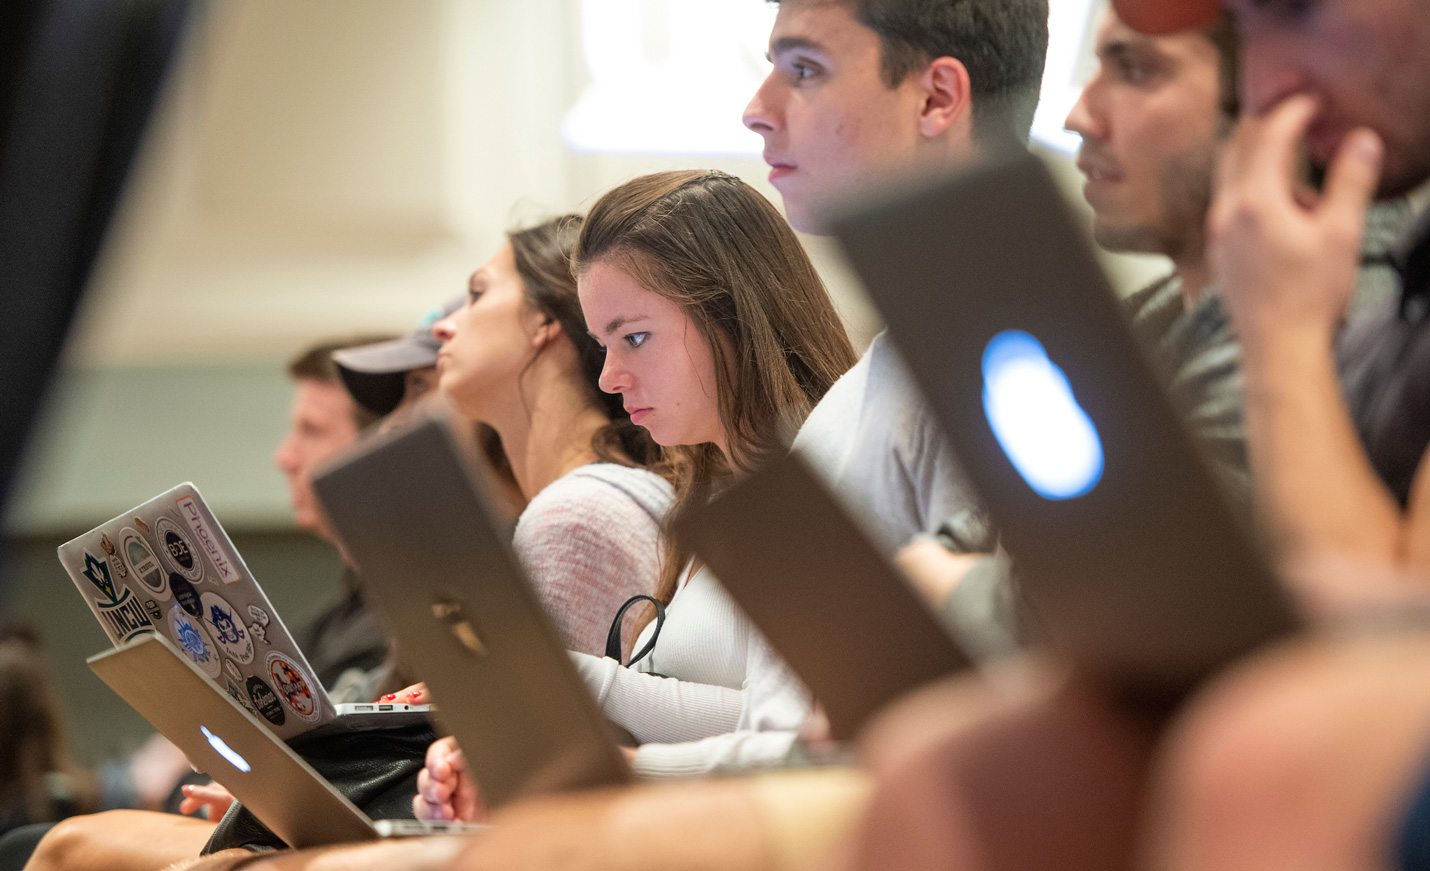 students attend a lecture taking notes on their laptops